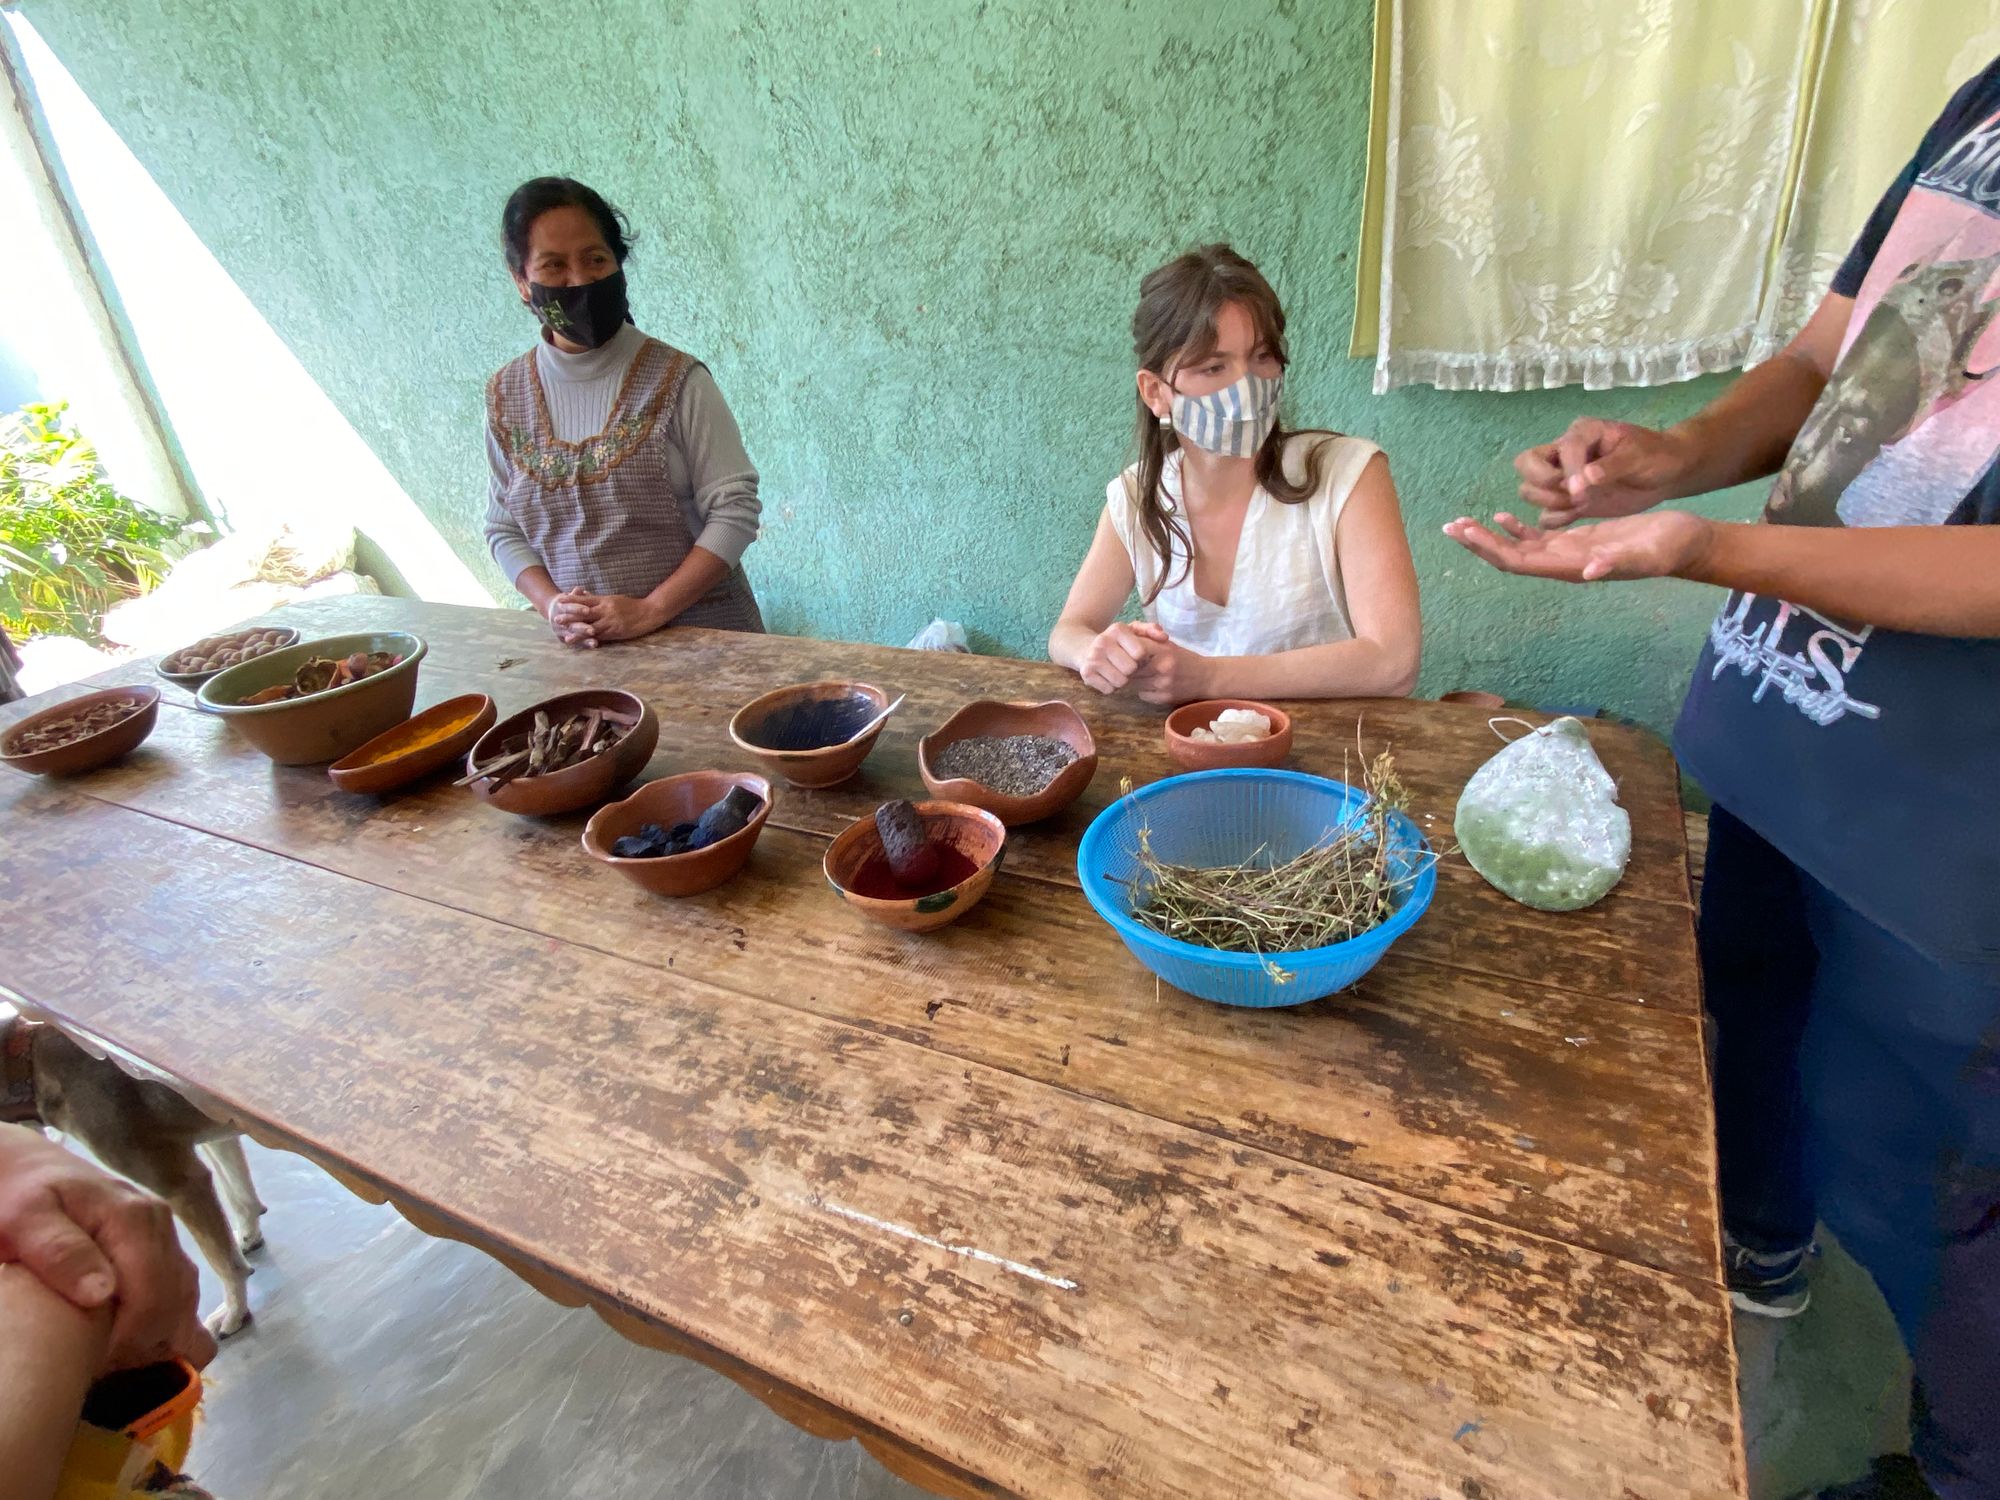 NATURAL DYES AND WEAVING WITH THE THREAD CARAVAN